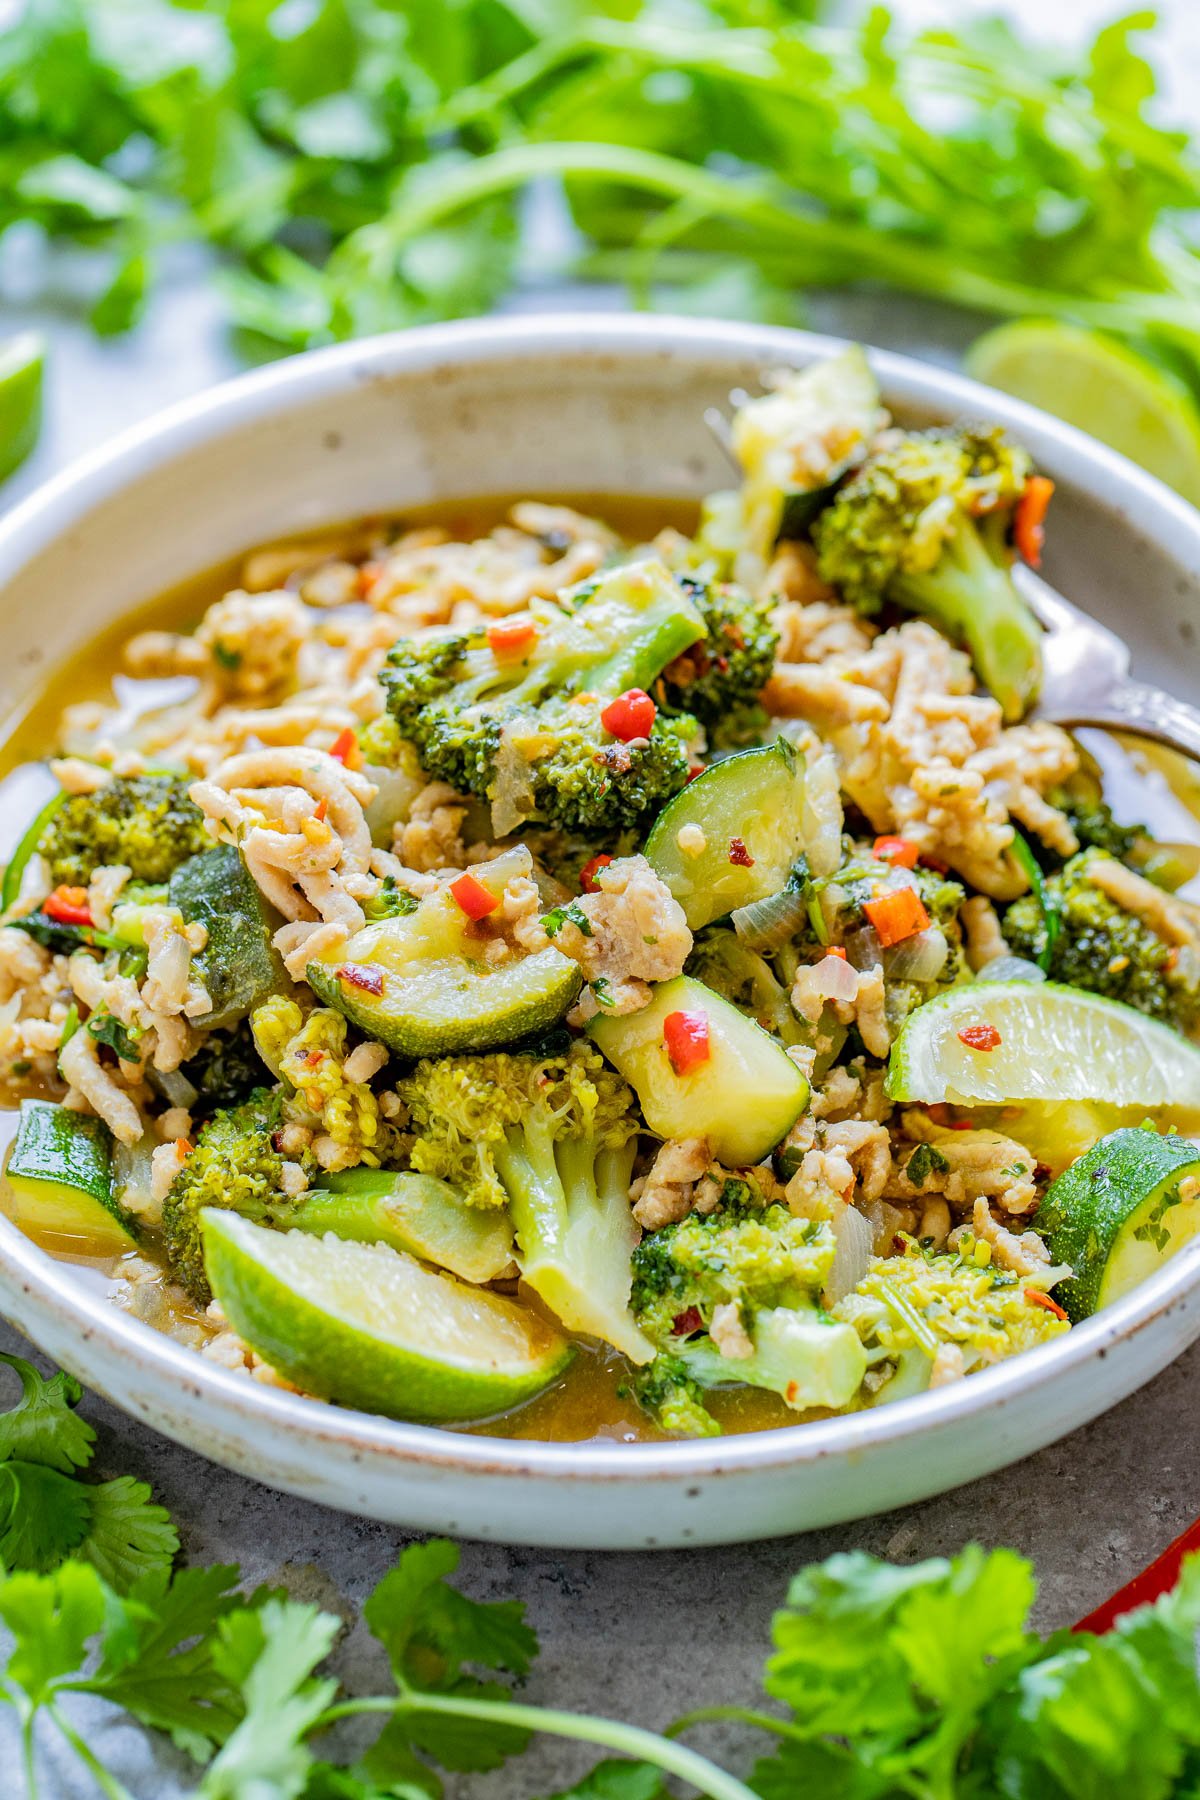 A bowl of green curry with ground chicken, broccoli, zucchini, and herbs, garnished with red chili slices.